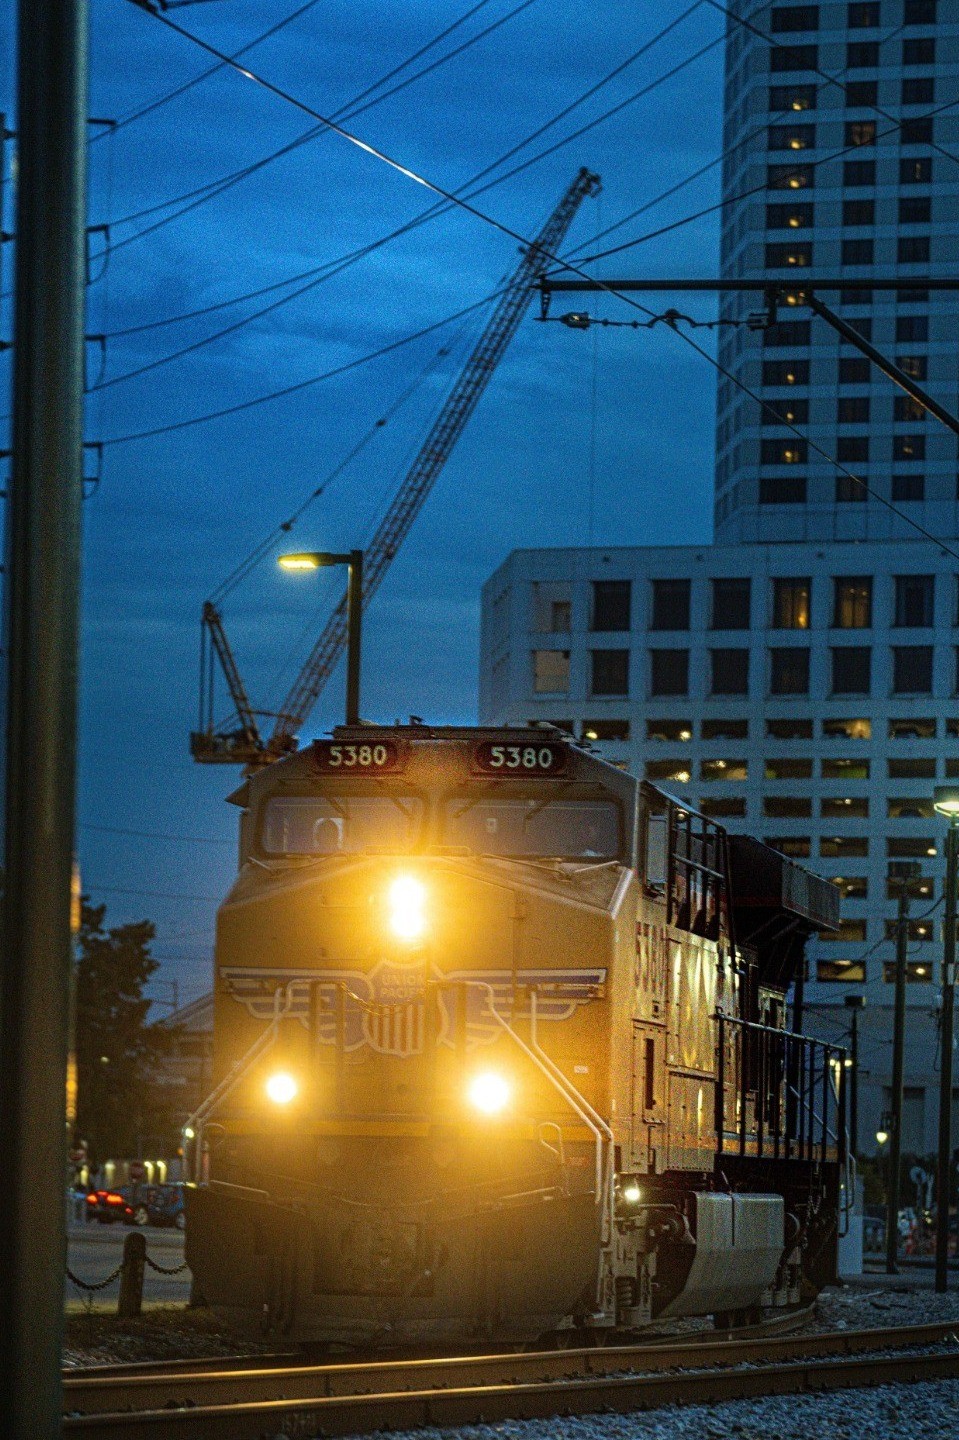 The New Orleans Train 